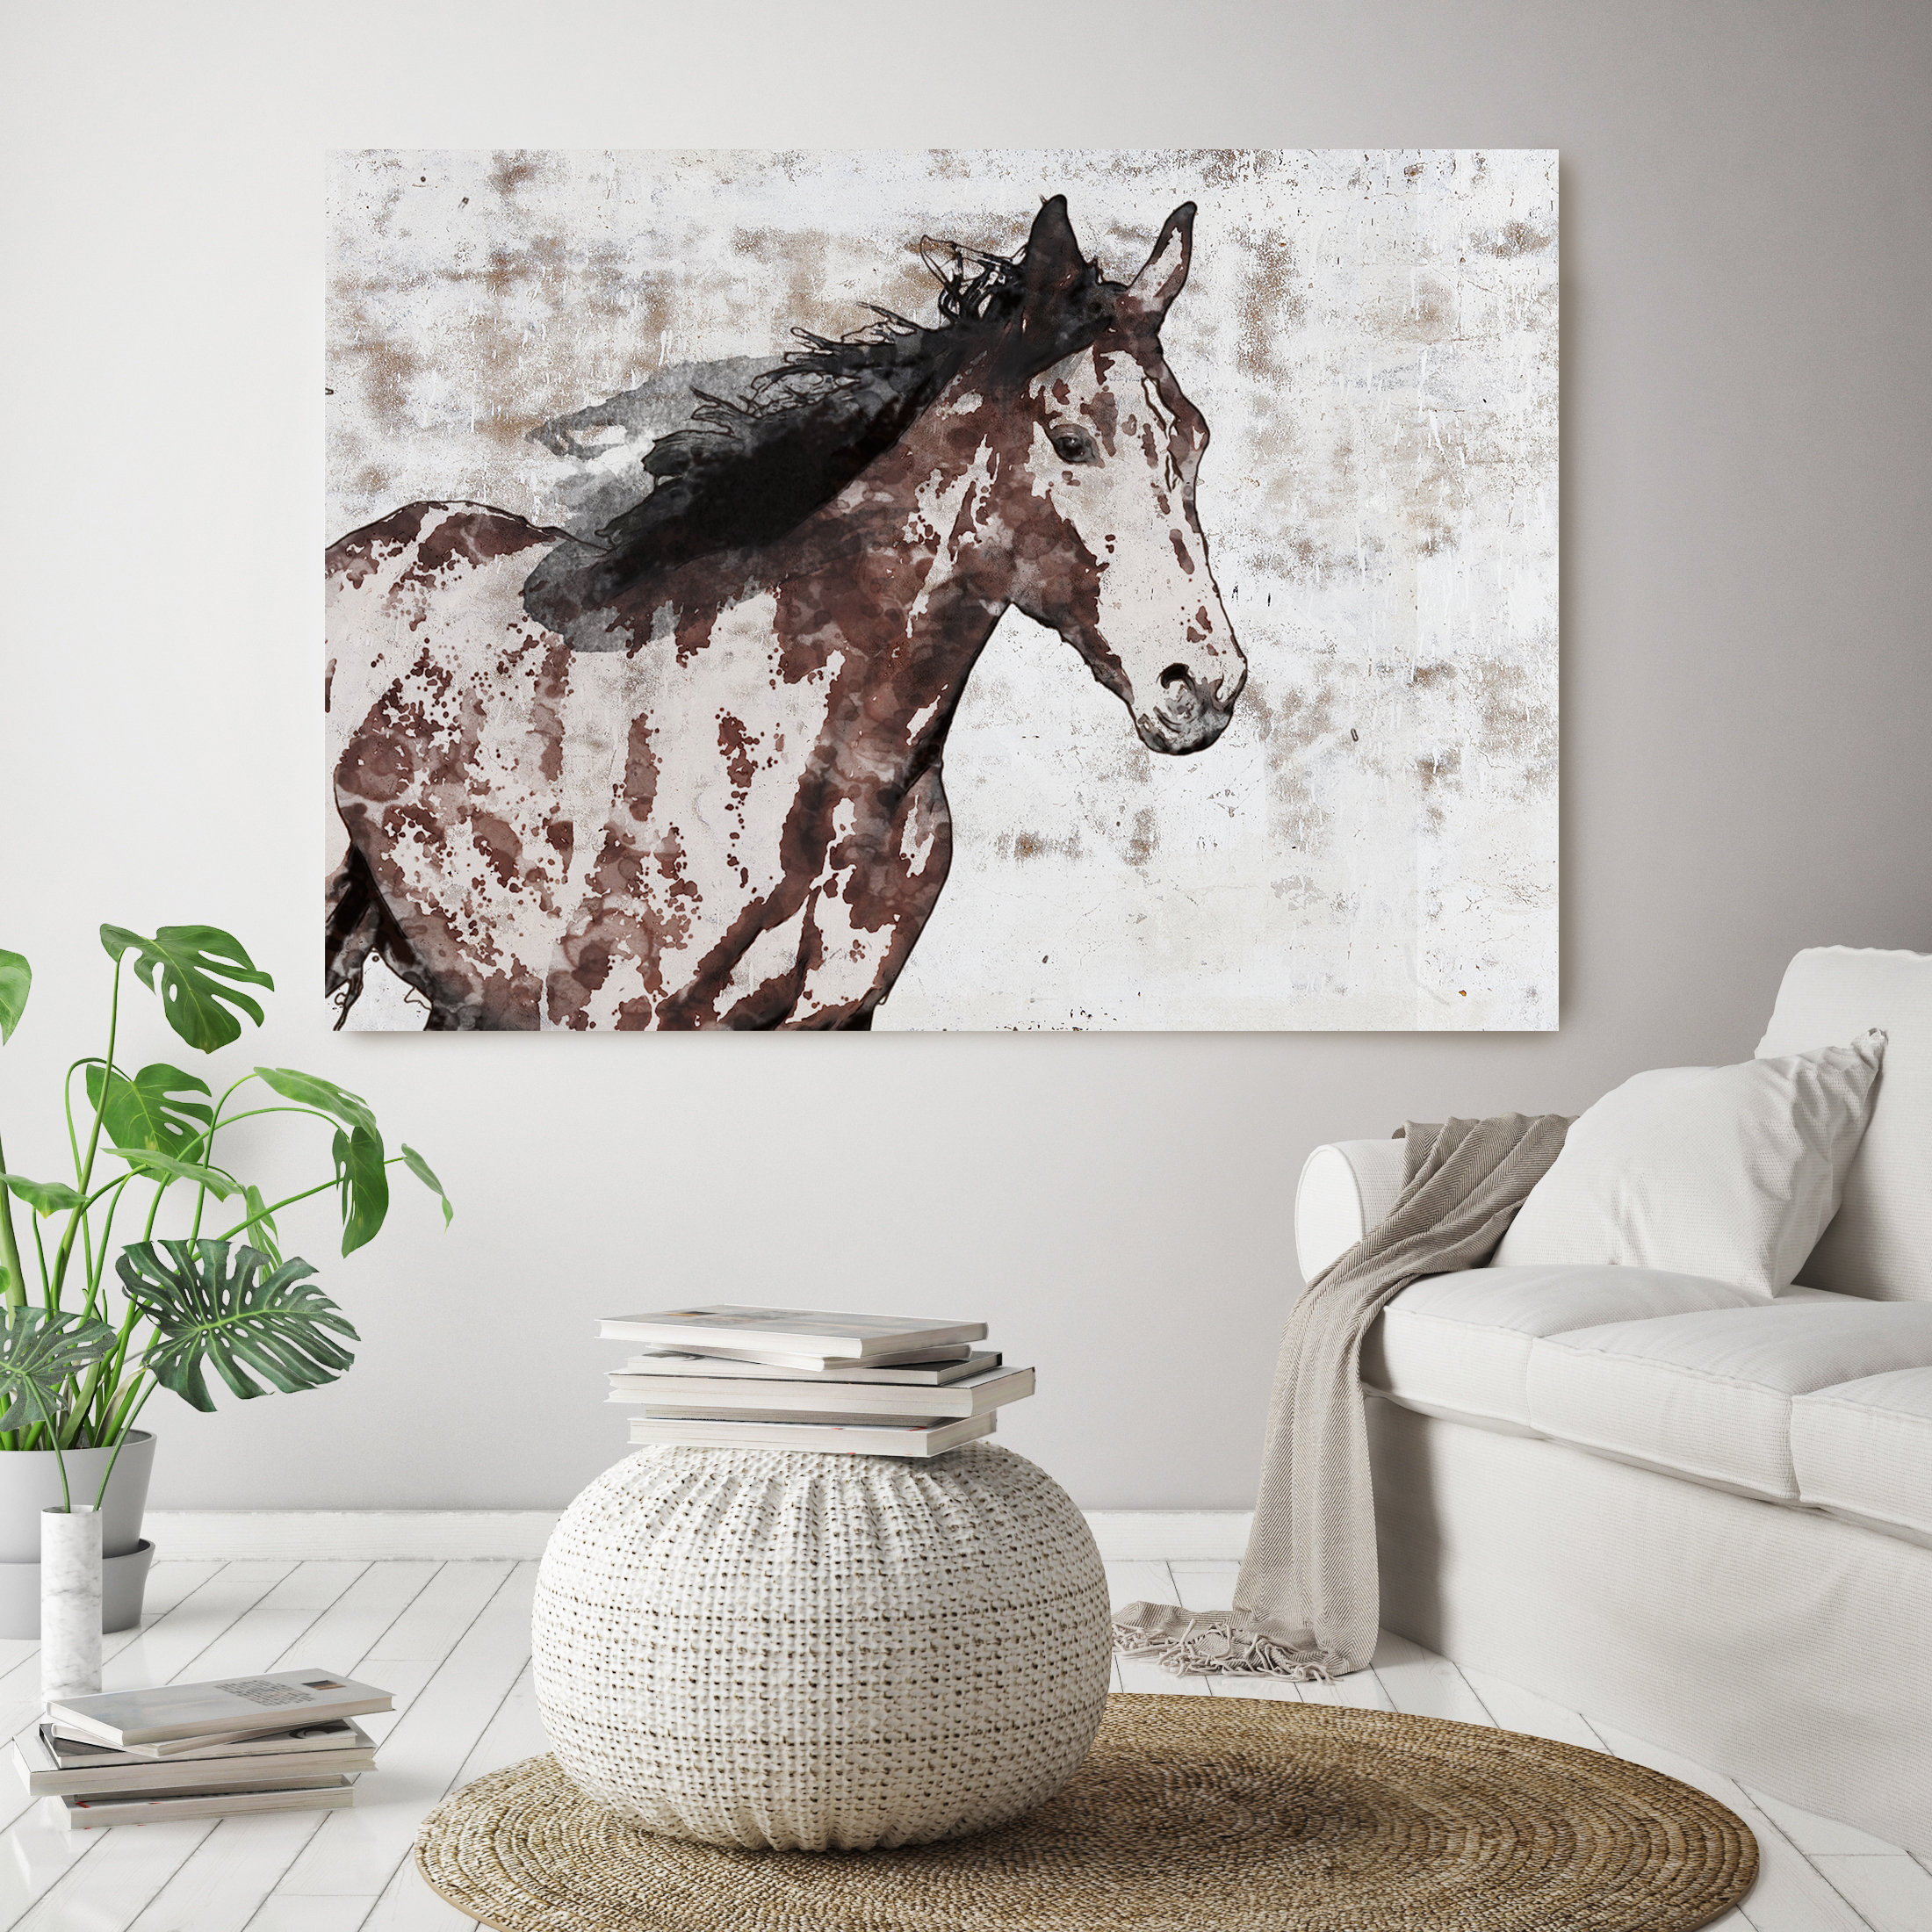 Animals Giclee Canvas Prints Painting Horses Picture Wall Art for Living Room